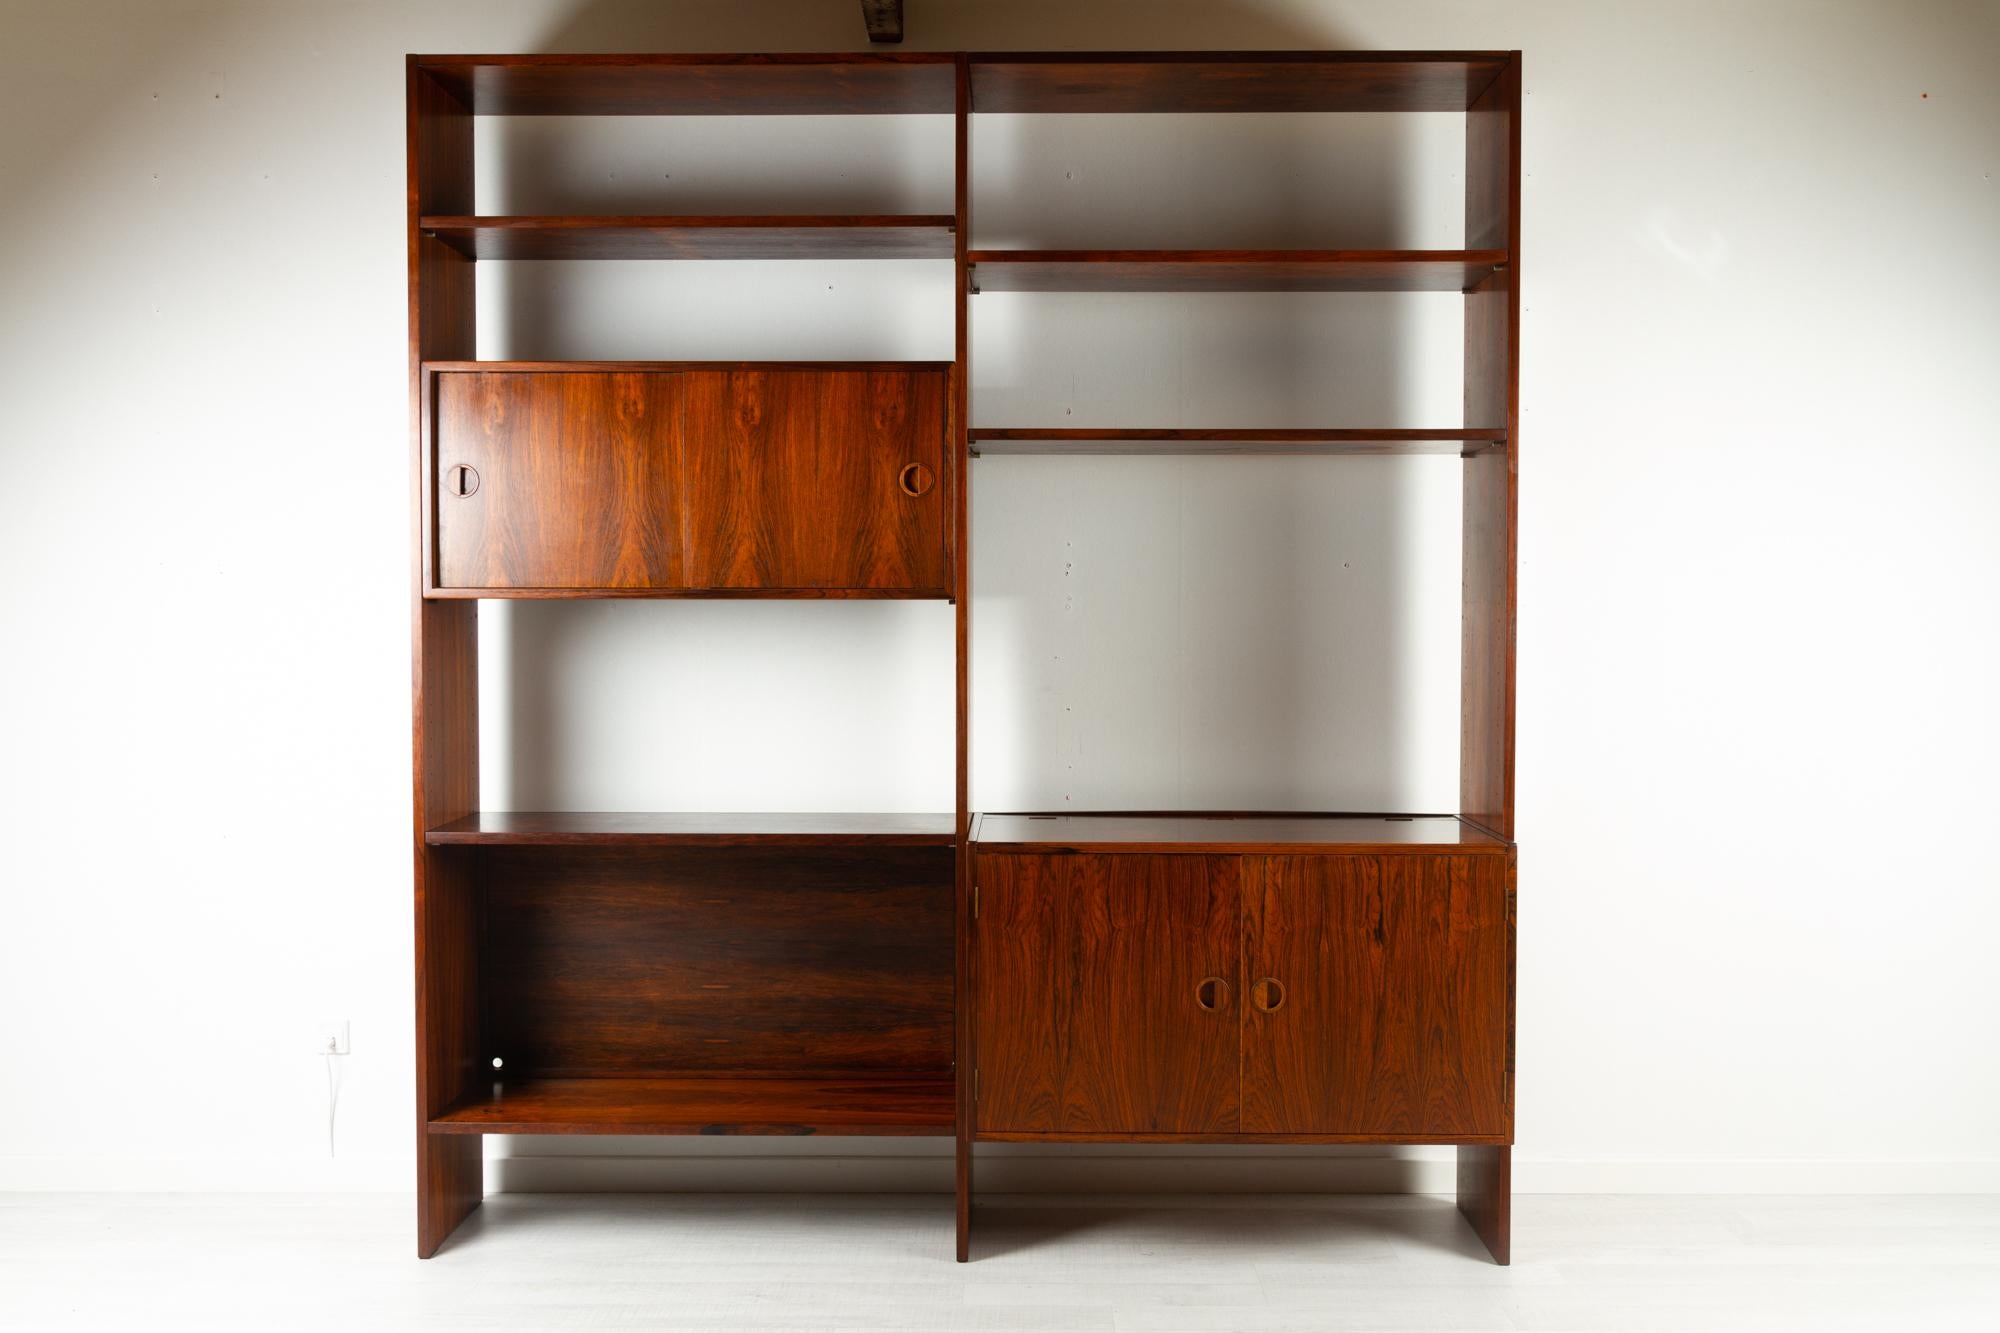 Danish rosewood wall unit by HG Furniture (Hansen & Guldborg) 1960s
Scandinavian modern two bay wall unit with shelves and cabinets. Four height adjustable shelves. Bar cabinet with double sliding doors. Stereo cabinet with room record player and